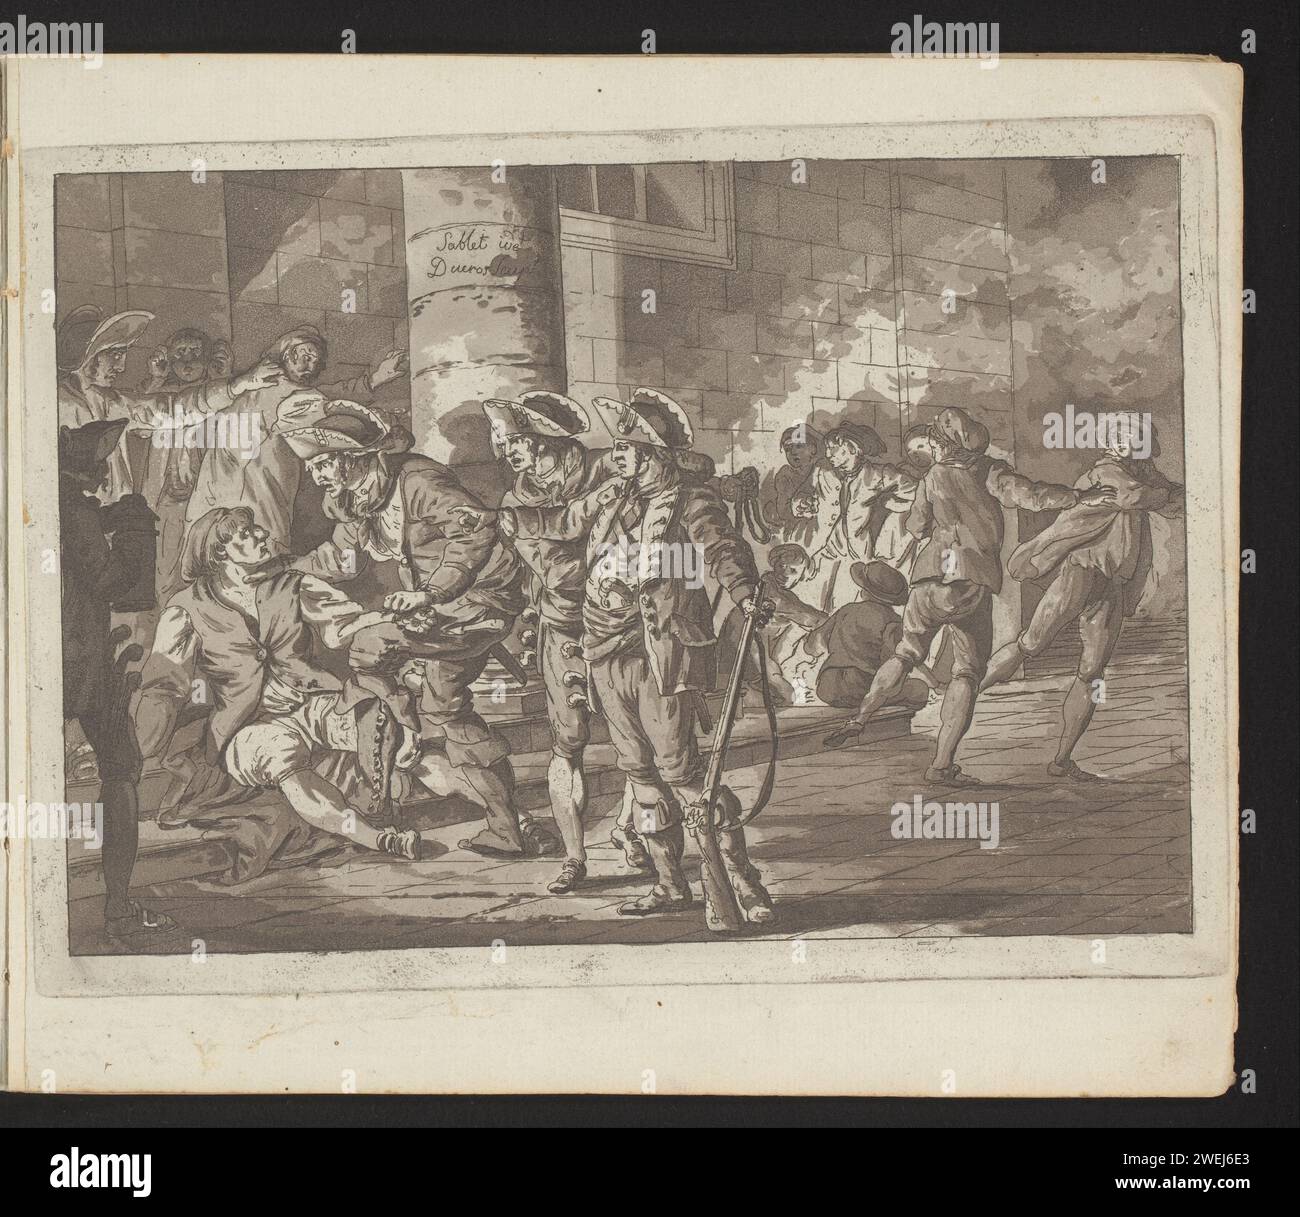 Man on the street is arrested by soldiers, Louis Ducros, after Jacques Sablet (II), 1758 - 1810 print Print is part of an album.  paper etching Europeans (with NAME). arrest  military service. flight, running away; pursuing Stock Photo